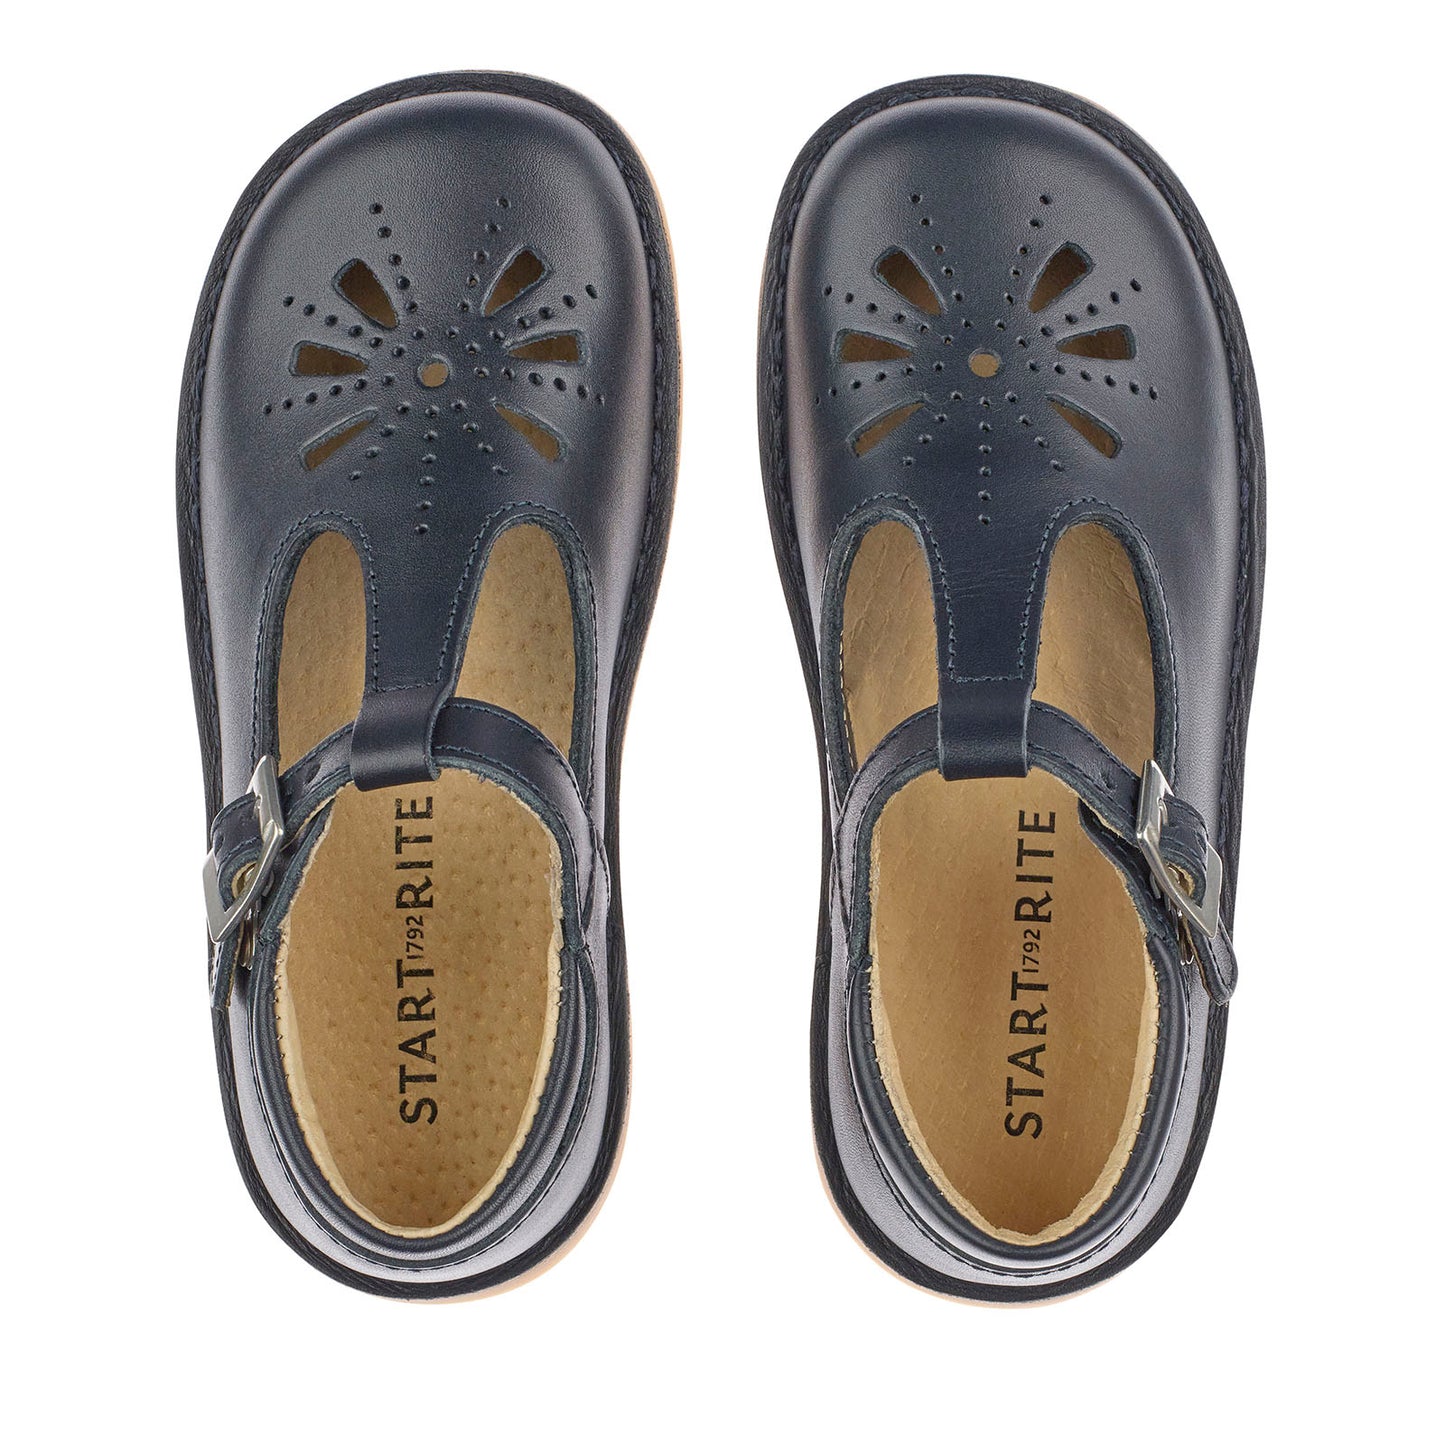 Lottie Classic Navy Leather Buckled T-Bar Stitchdown Shoe